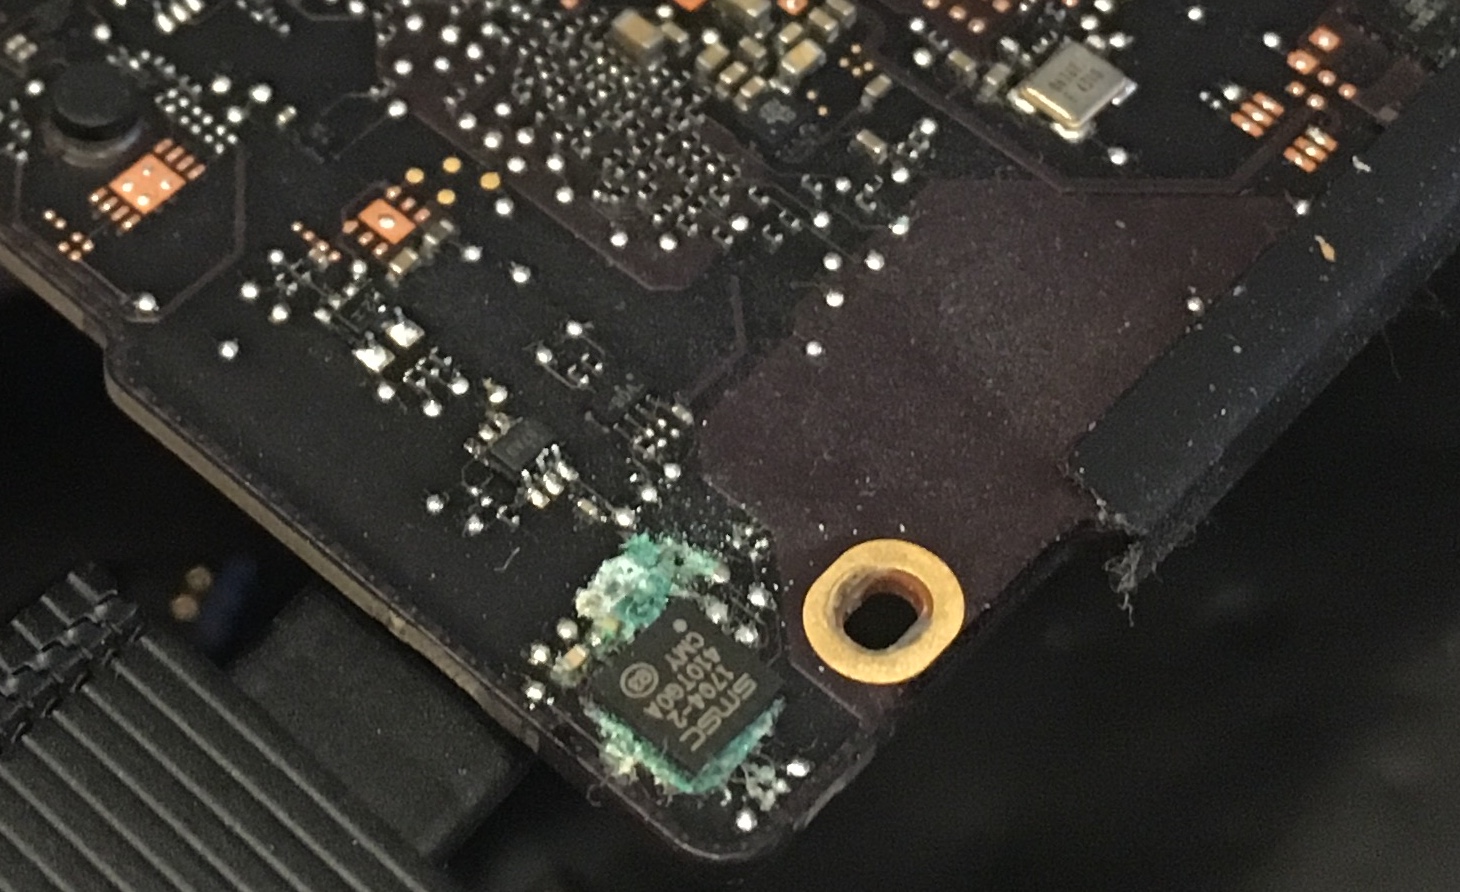 Blue corrosion surrounding an IC on the bottom of the board